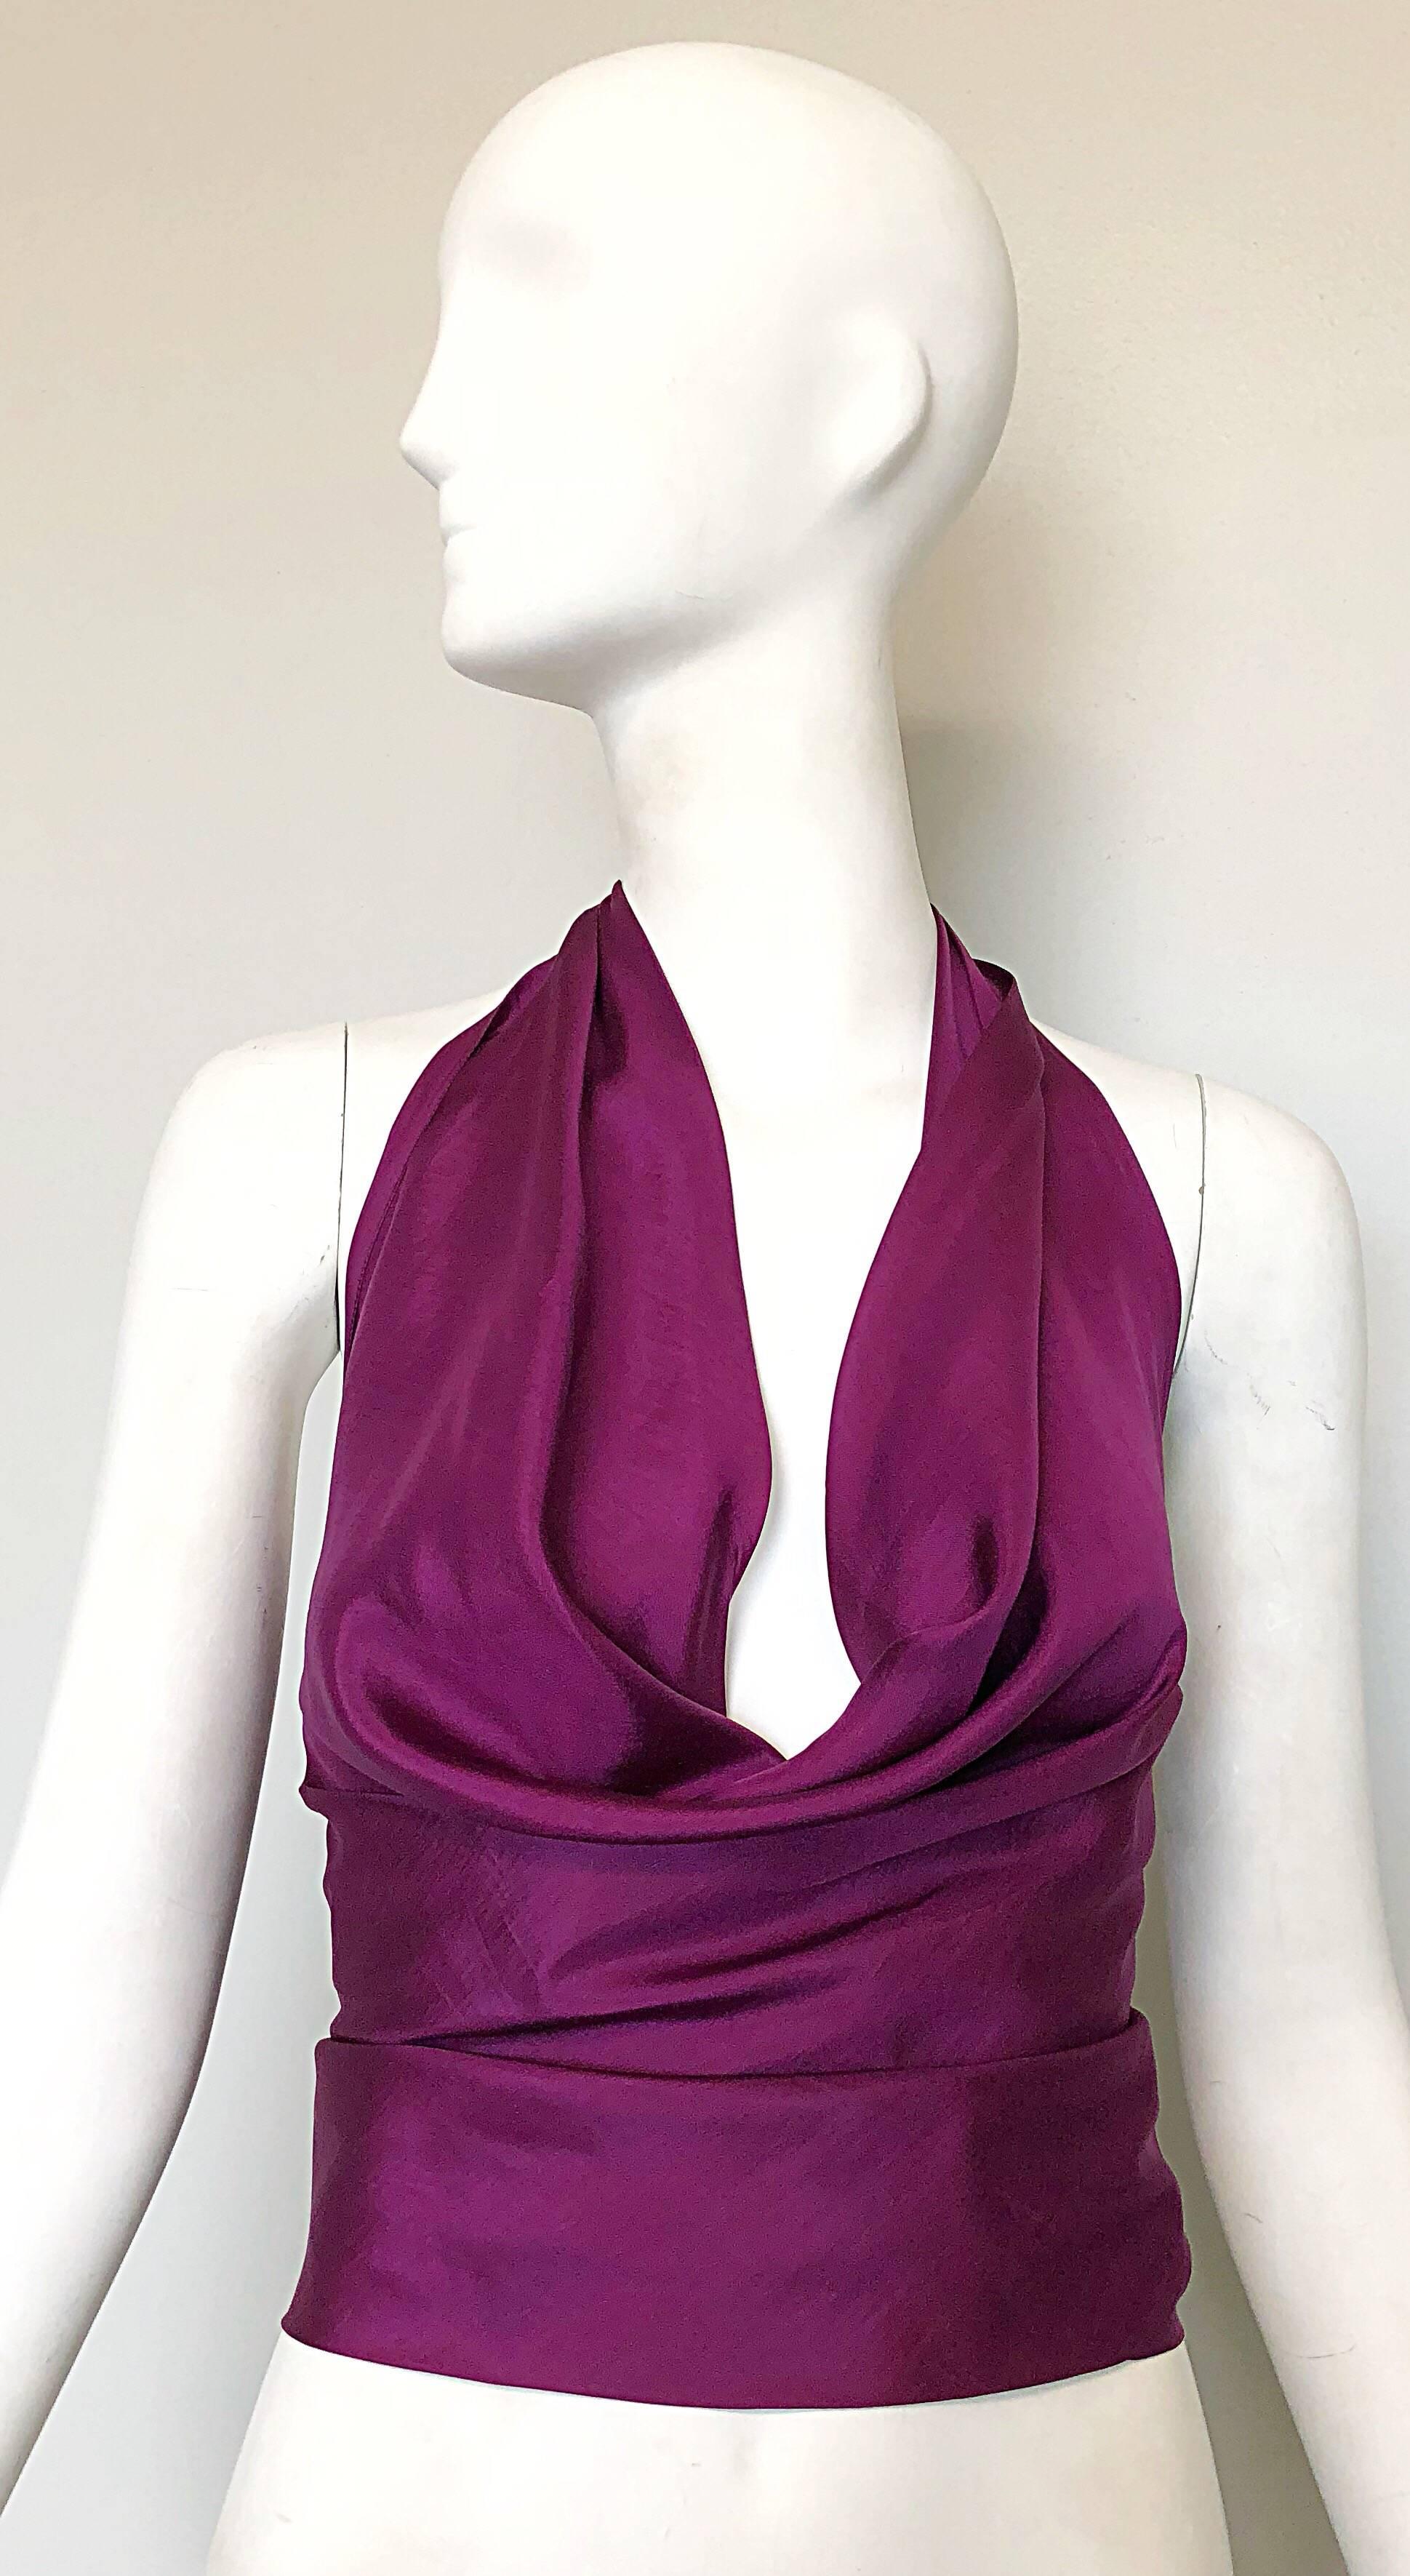 Sexy 1970s CARDINALI original sample purple grape silk halter top! This gem comes directly from Marilyn Lewis' (the designer and creator of Cardinali) estate. Slips over the head and ties in the back. Soft luxurious silk in a vibrant purple grape